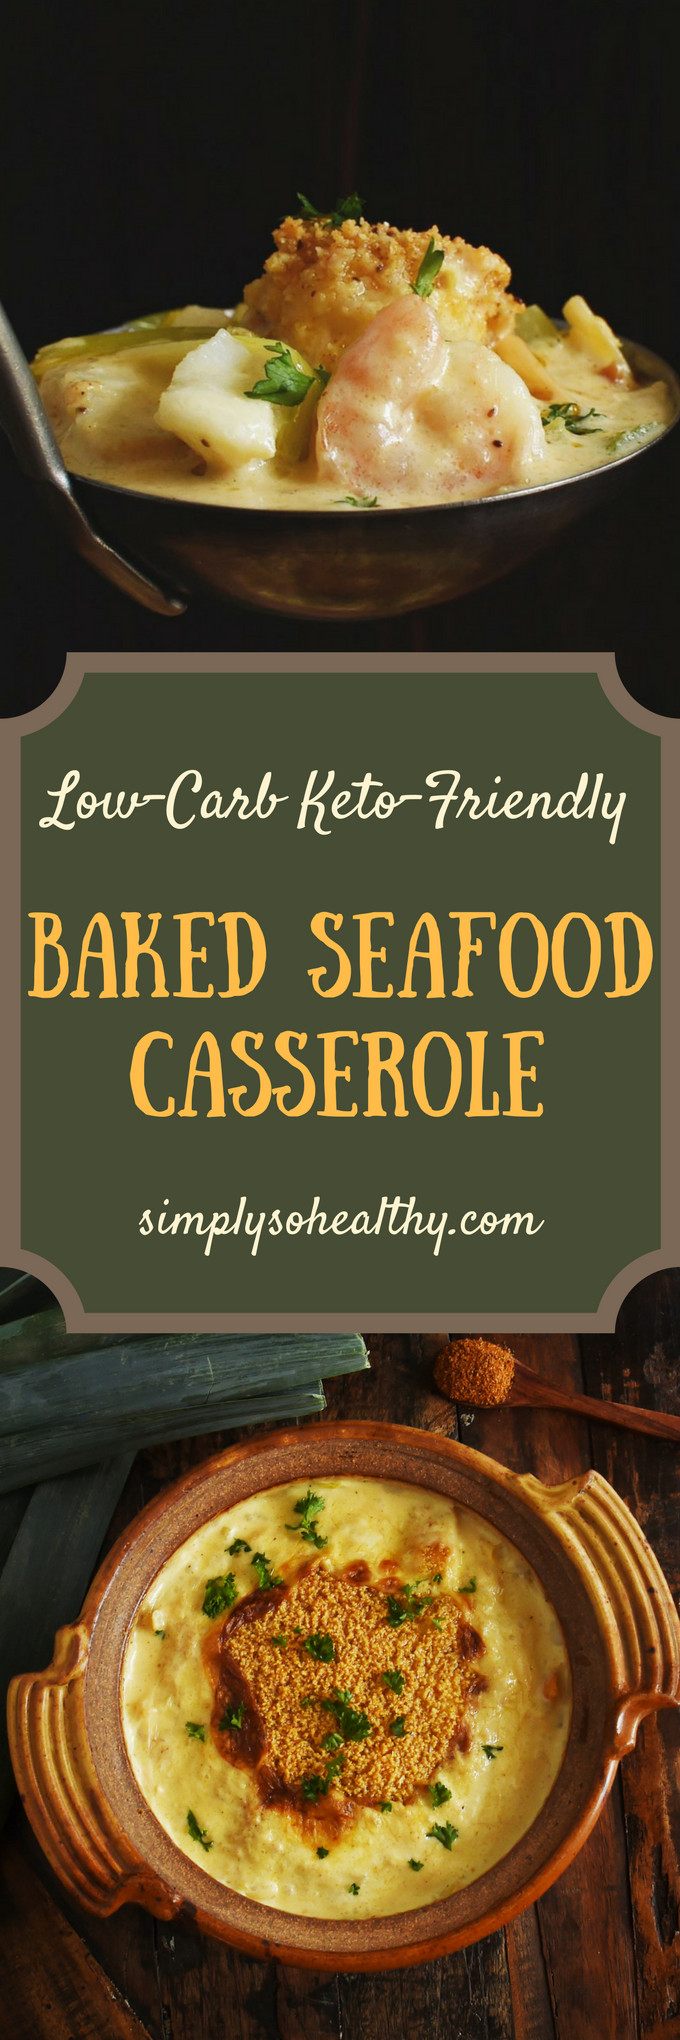 Low Carb Seafood Casserole
 Low Carb Baked Seafood Casserole Recipe Simply So Healthy